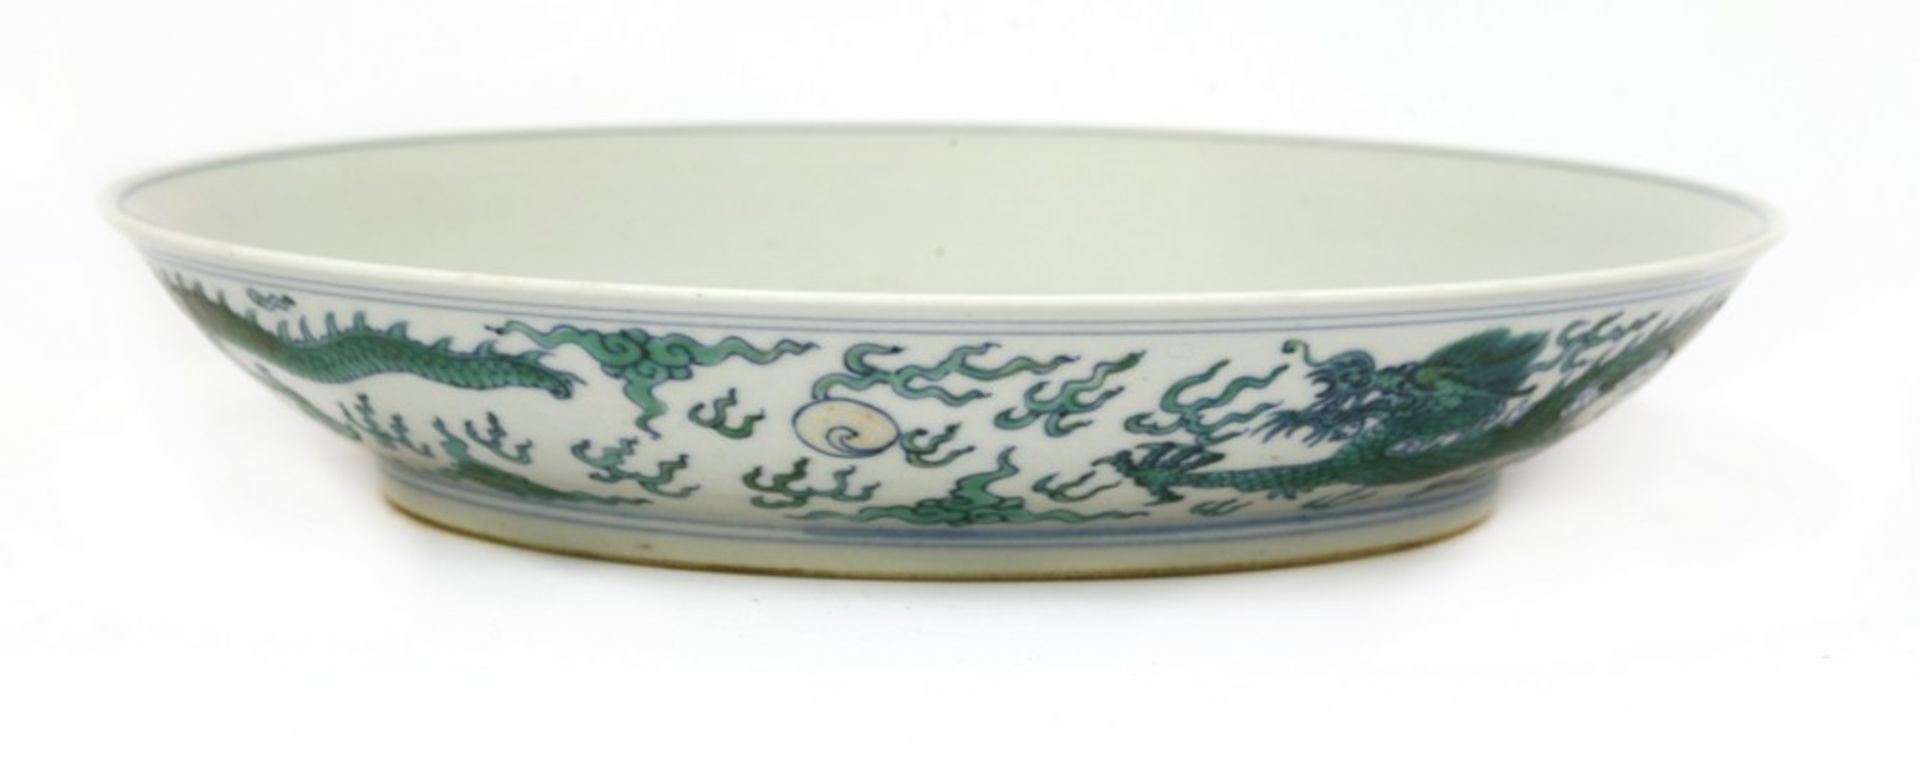 A Chinese porcelain plate - Image 2 of 3